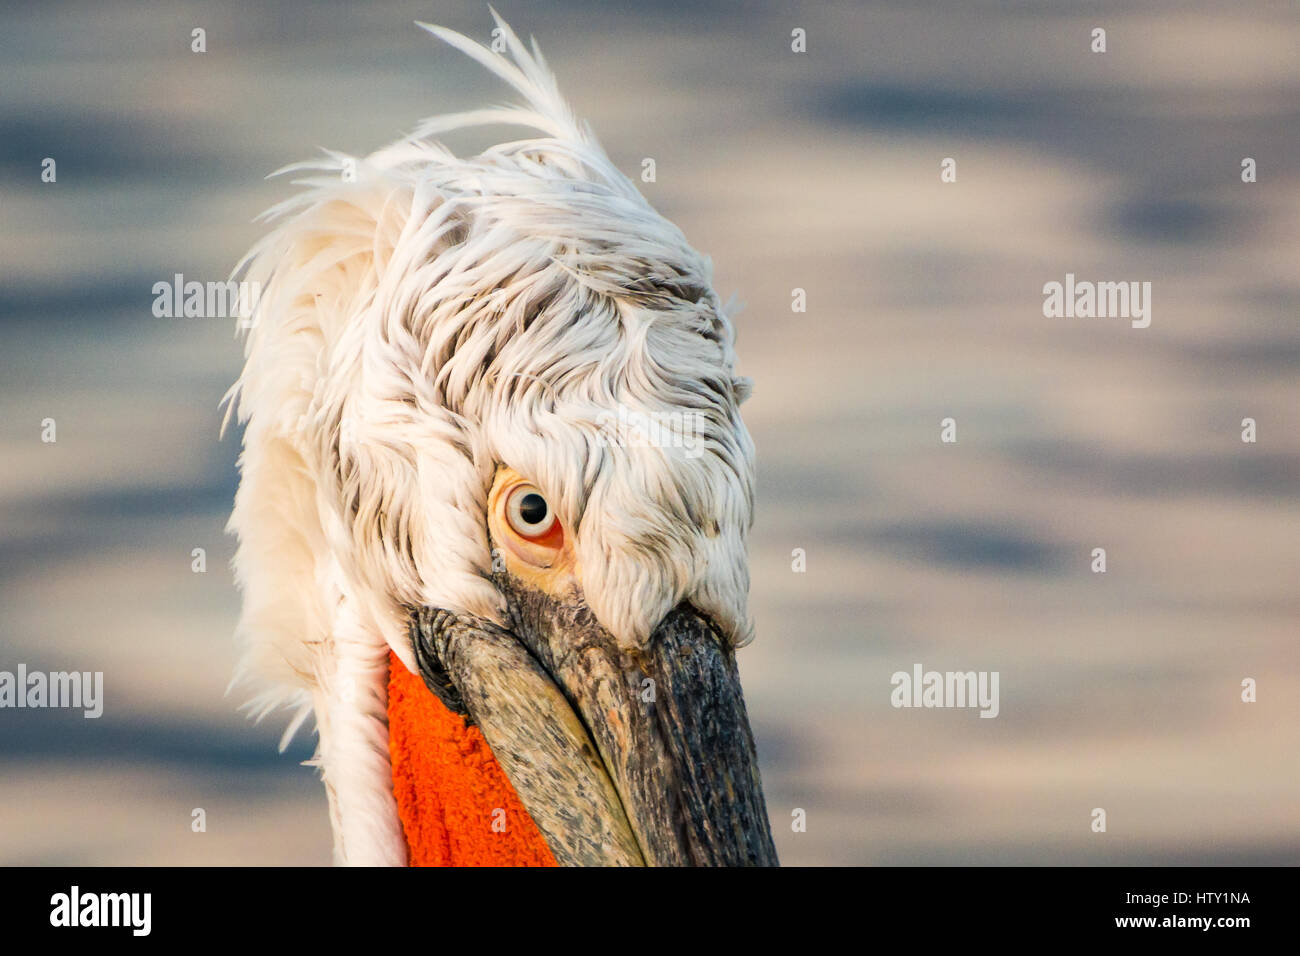 Dalmatian Pelicans at Kerkini Lake in Northern Greece with reflections in water and mountains at background. Stock Photo